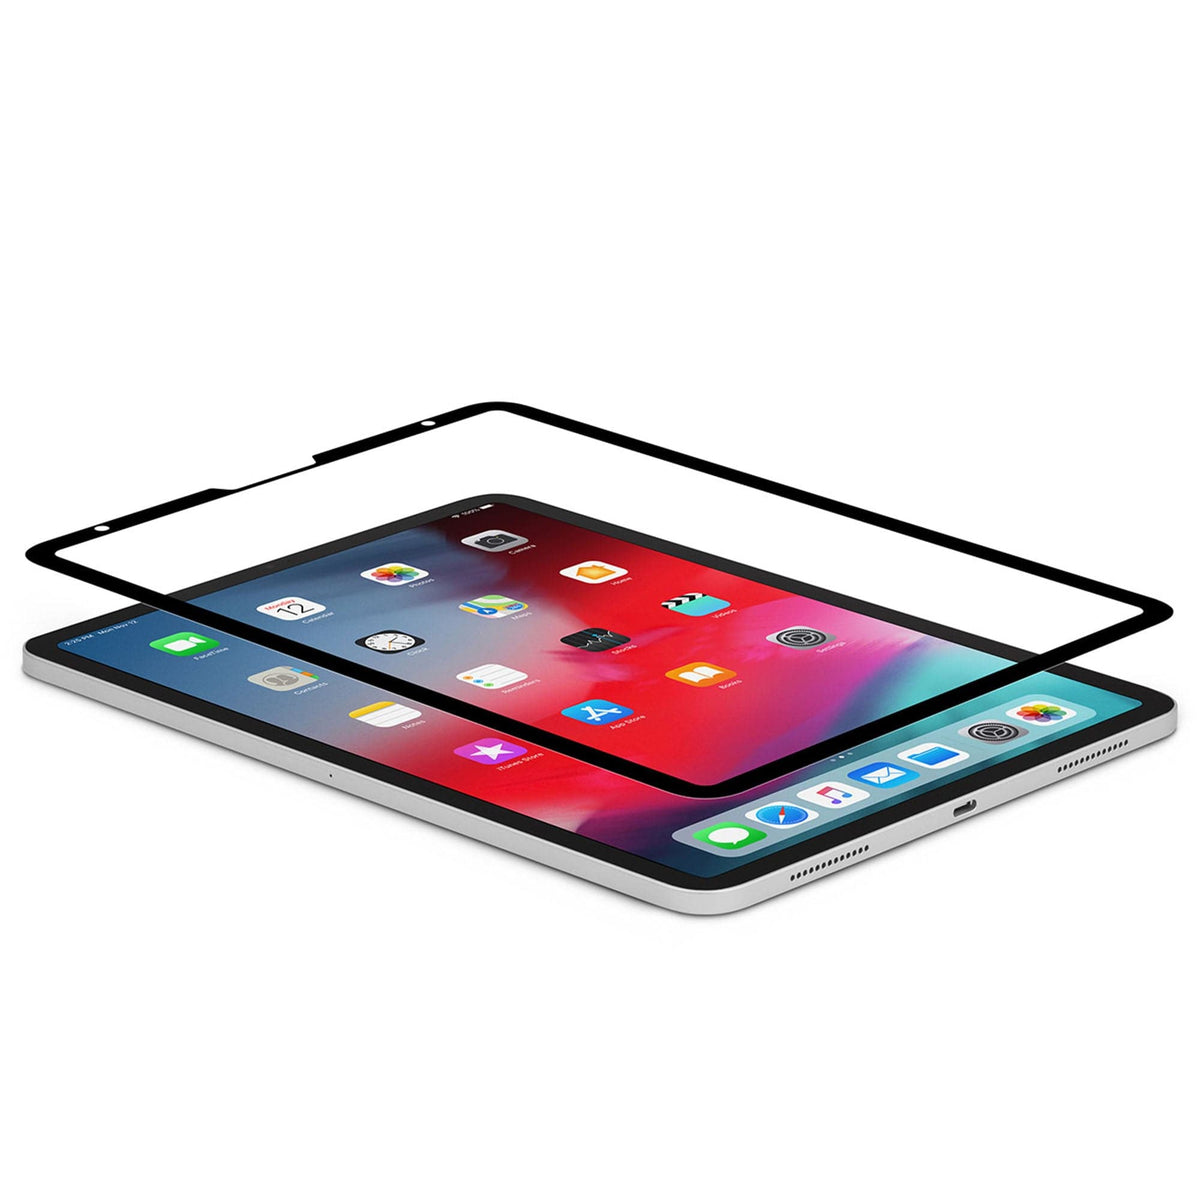 Moshi iVisor AG 100% Bubble-free and Washable Screen Protector for iPad Pro 11-inch